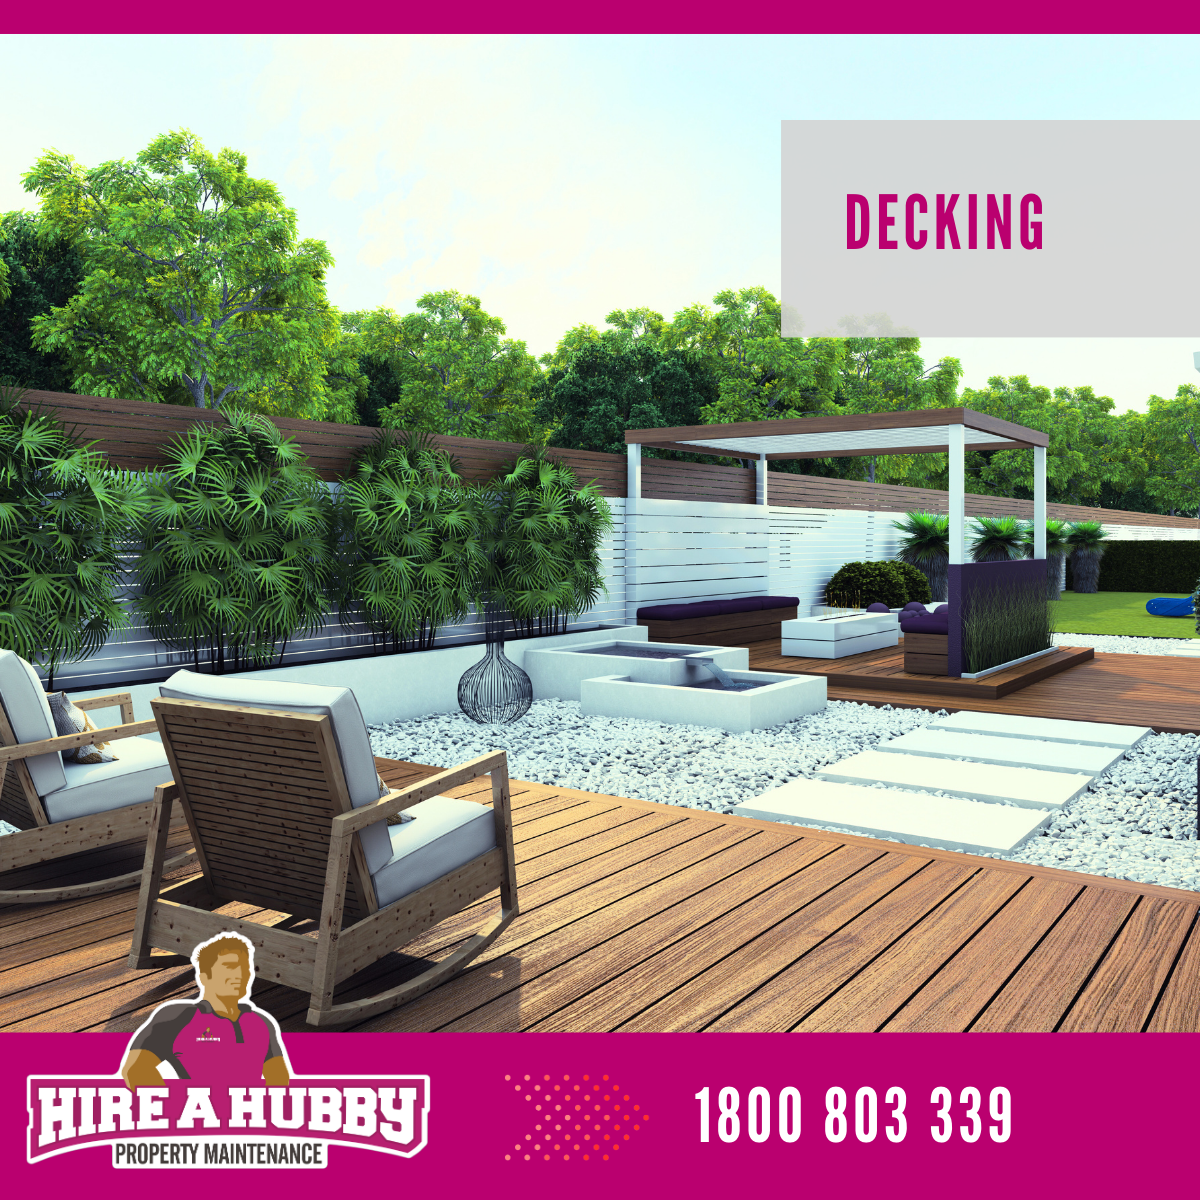 Decking and Outdoors repairs & Maintenance. Hire A Hubby Trinity Beach Brinsmead 1800 803 339